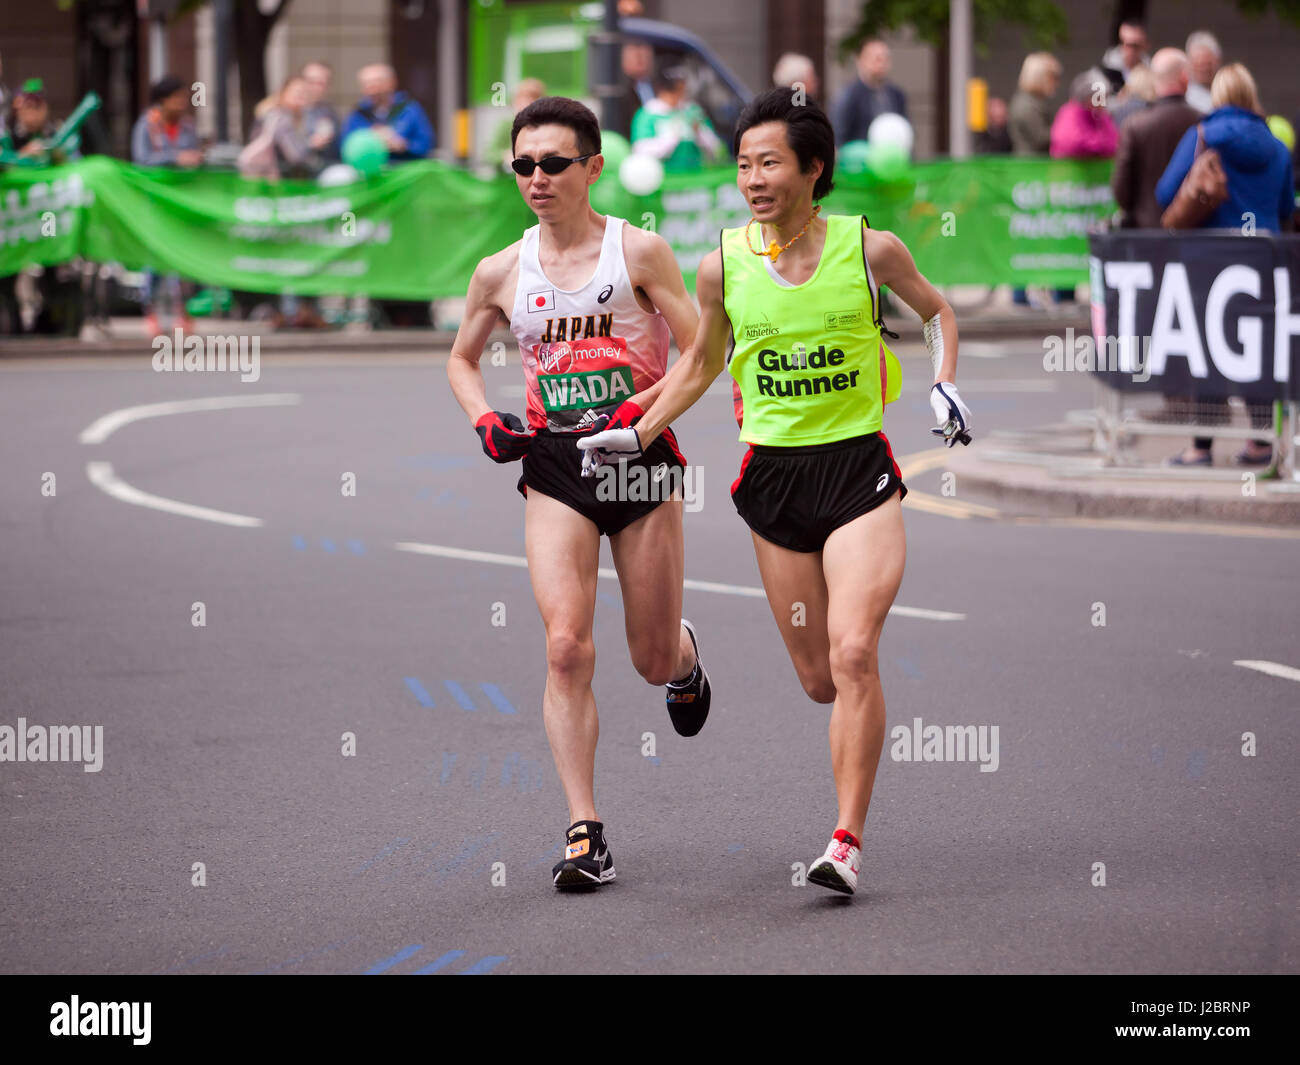 Shinya Wada, from Japan, with his guide runner competing in the 2017 London marathon. He went on to finish  5th in the World Para Athletic World Cup Stock Photo